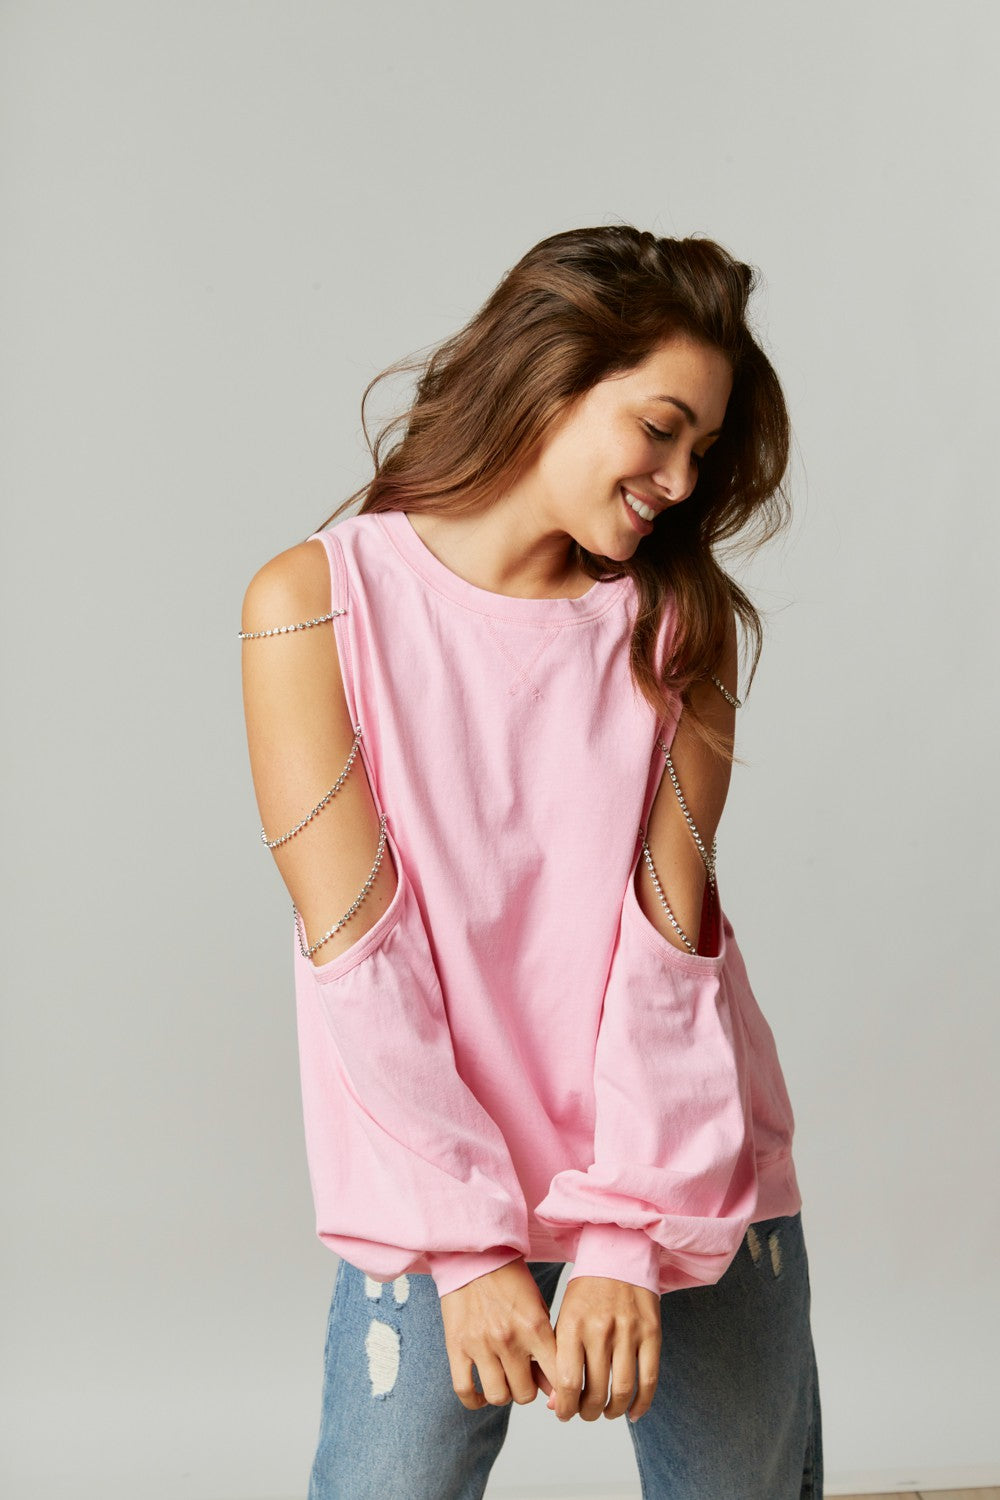 Made the Cut Jewel Chain Cold Shoulder Sweatshirt in Pink